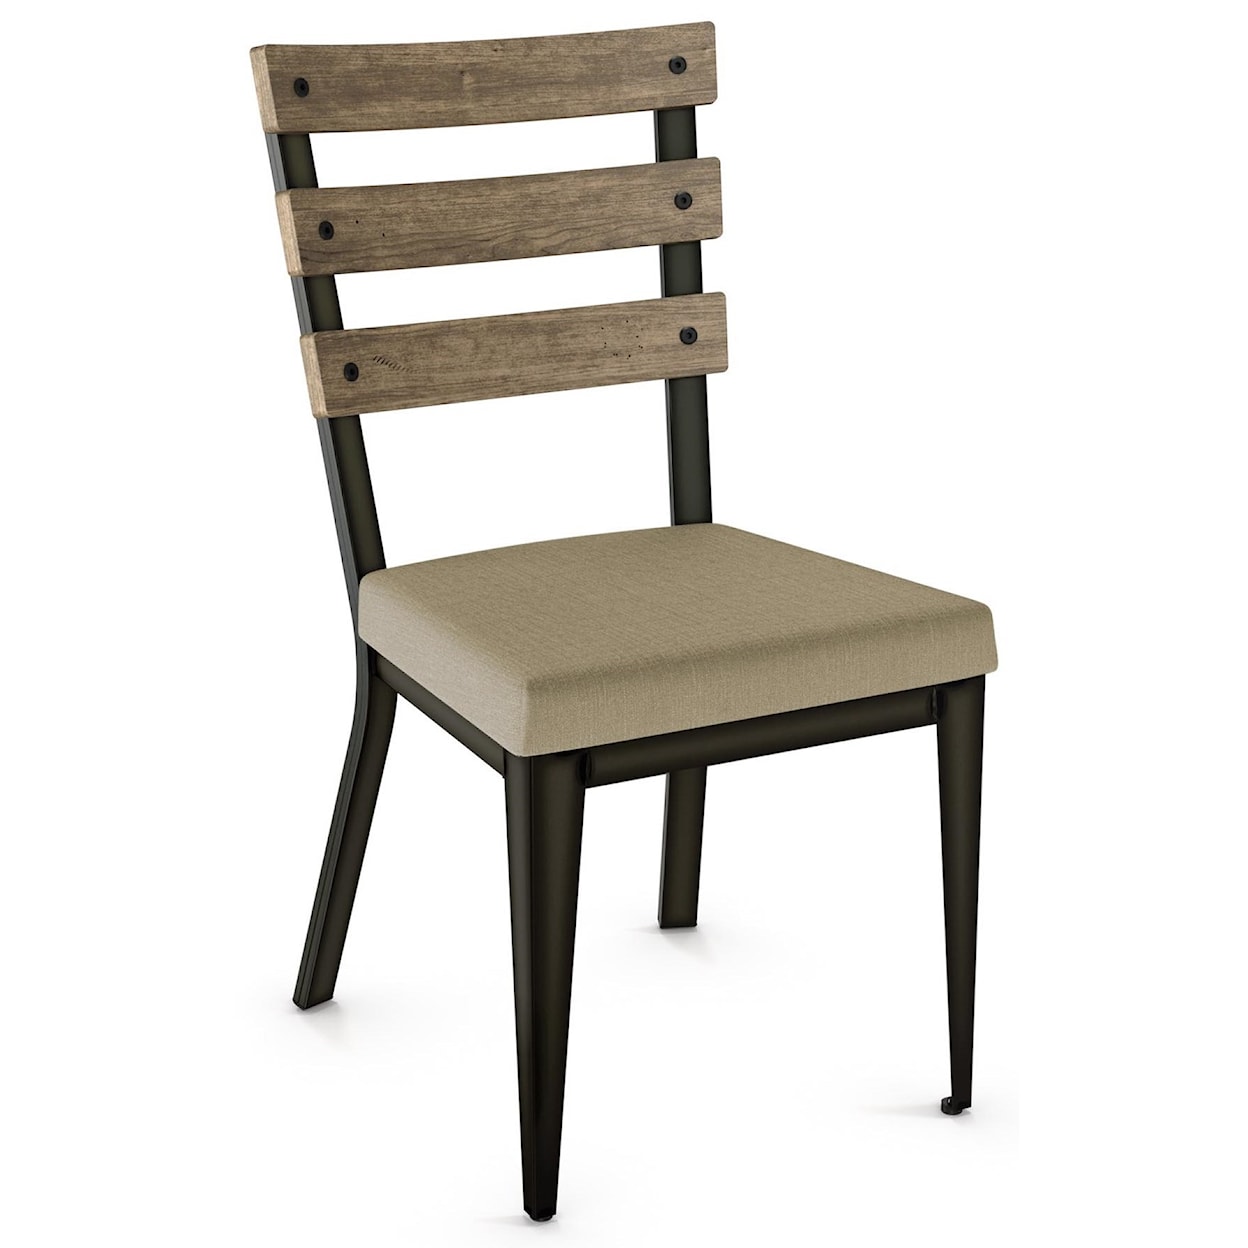 Amisco Industrial Dexter Chair with  Upholstered Seat